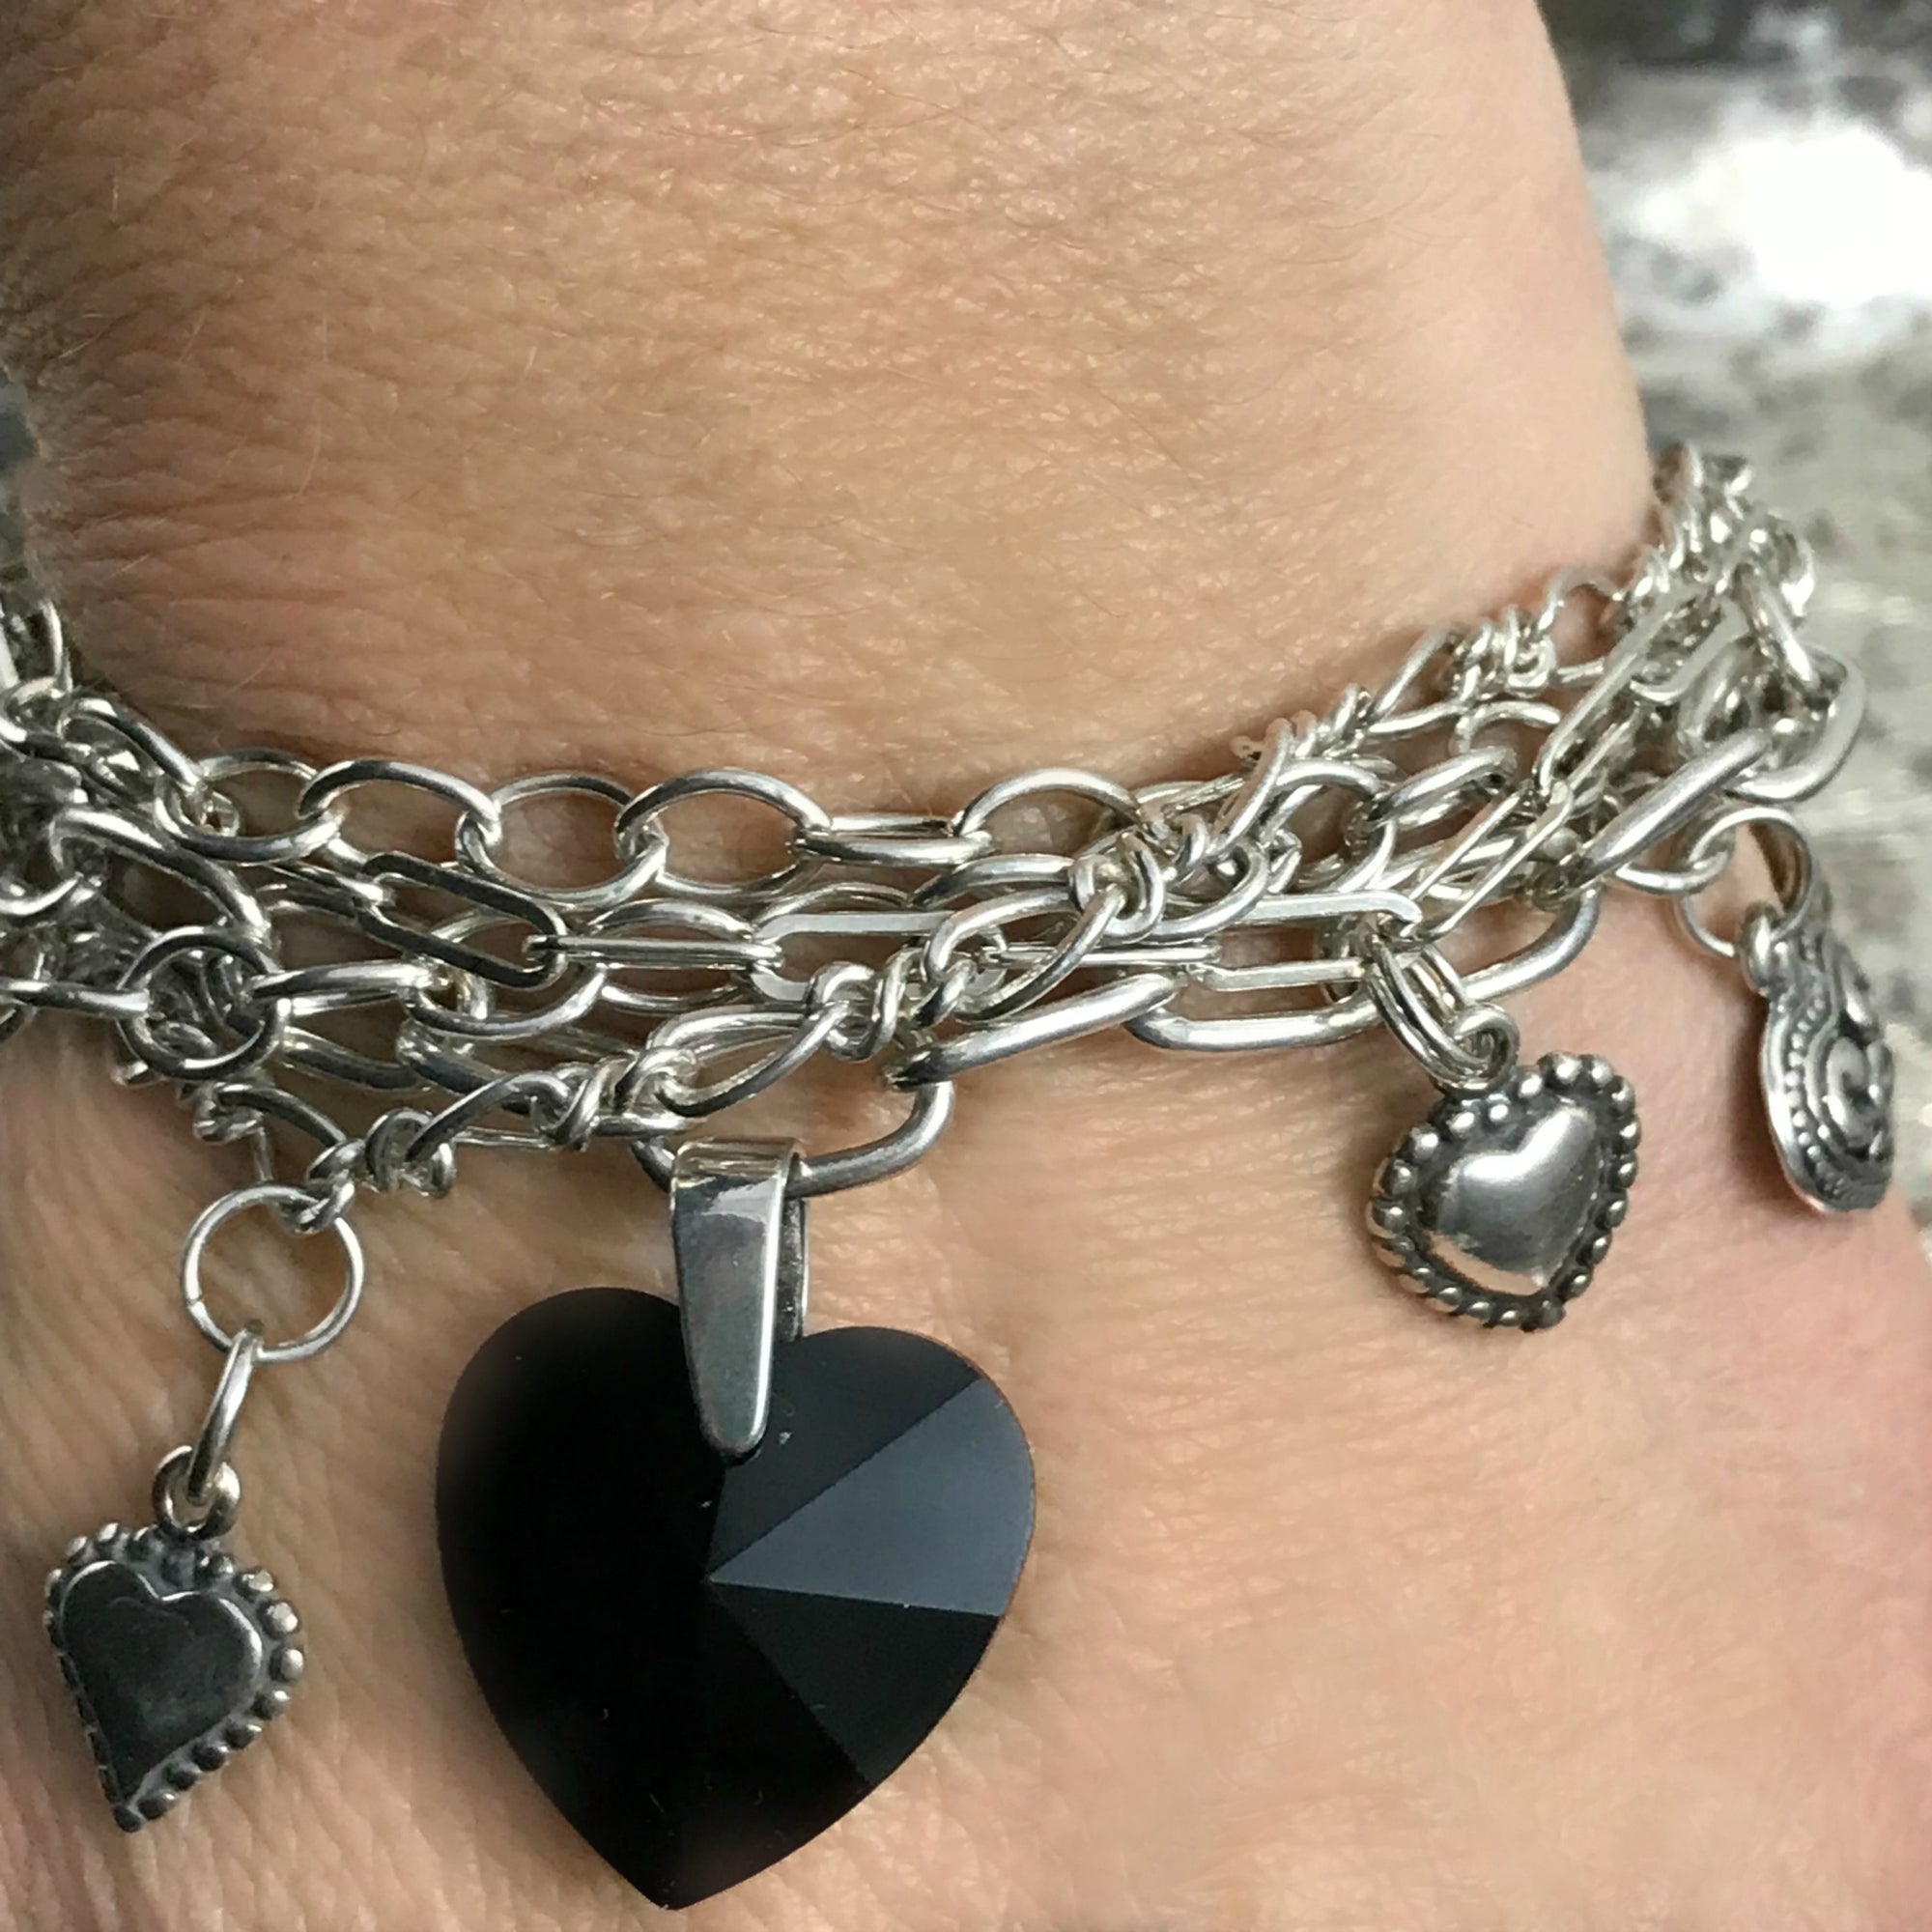 Suzie Q Studio -- Multi-strand sterling silver chain and charm bracelet. This sterling silver, multi-strand charm bracelet has a black Swarovski crystal heart focal charm, combined with sterling silver chain, charms and spectacular sterling silver, heart-shaped toggle-style clasp. 